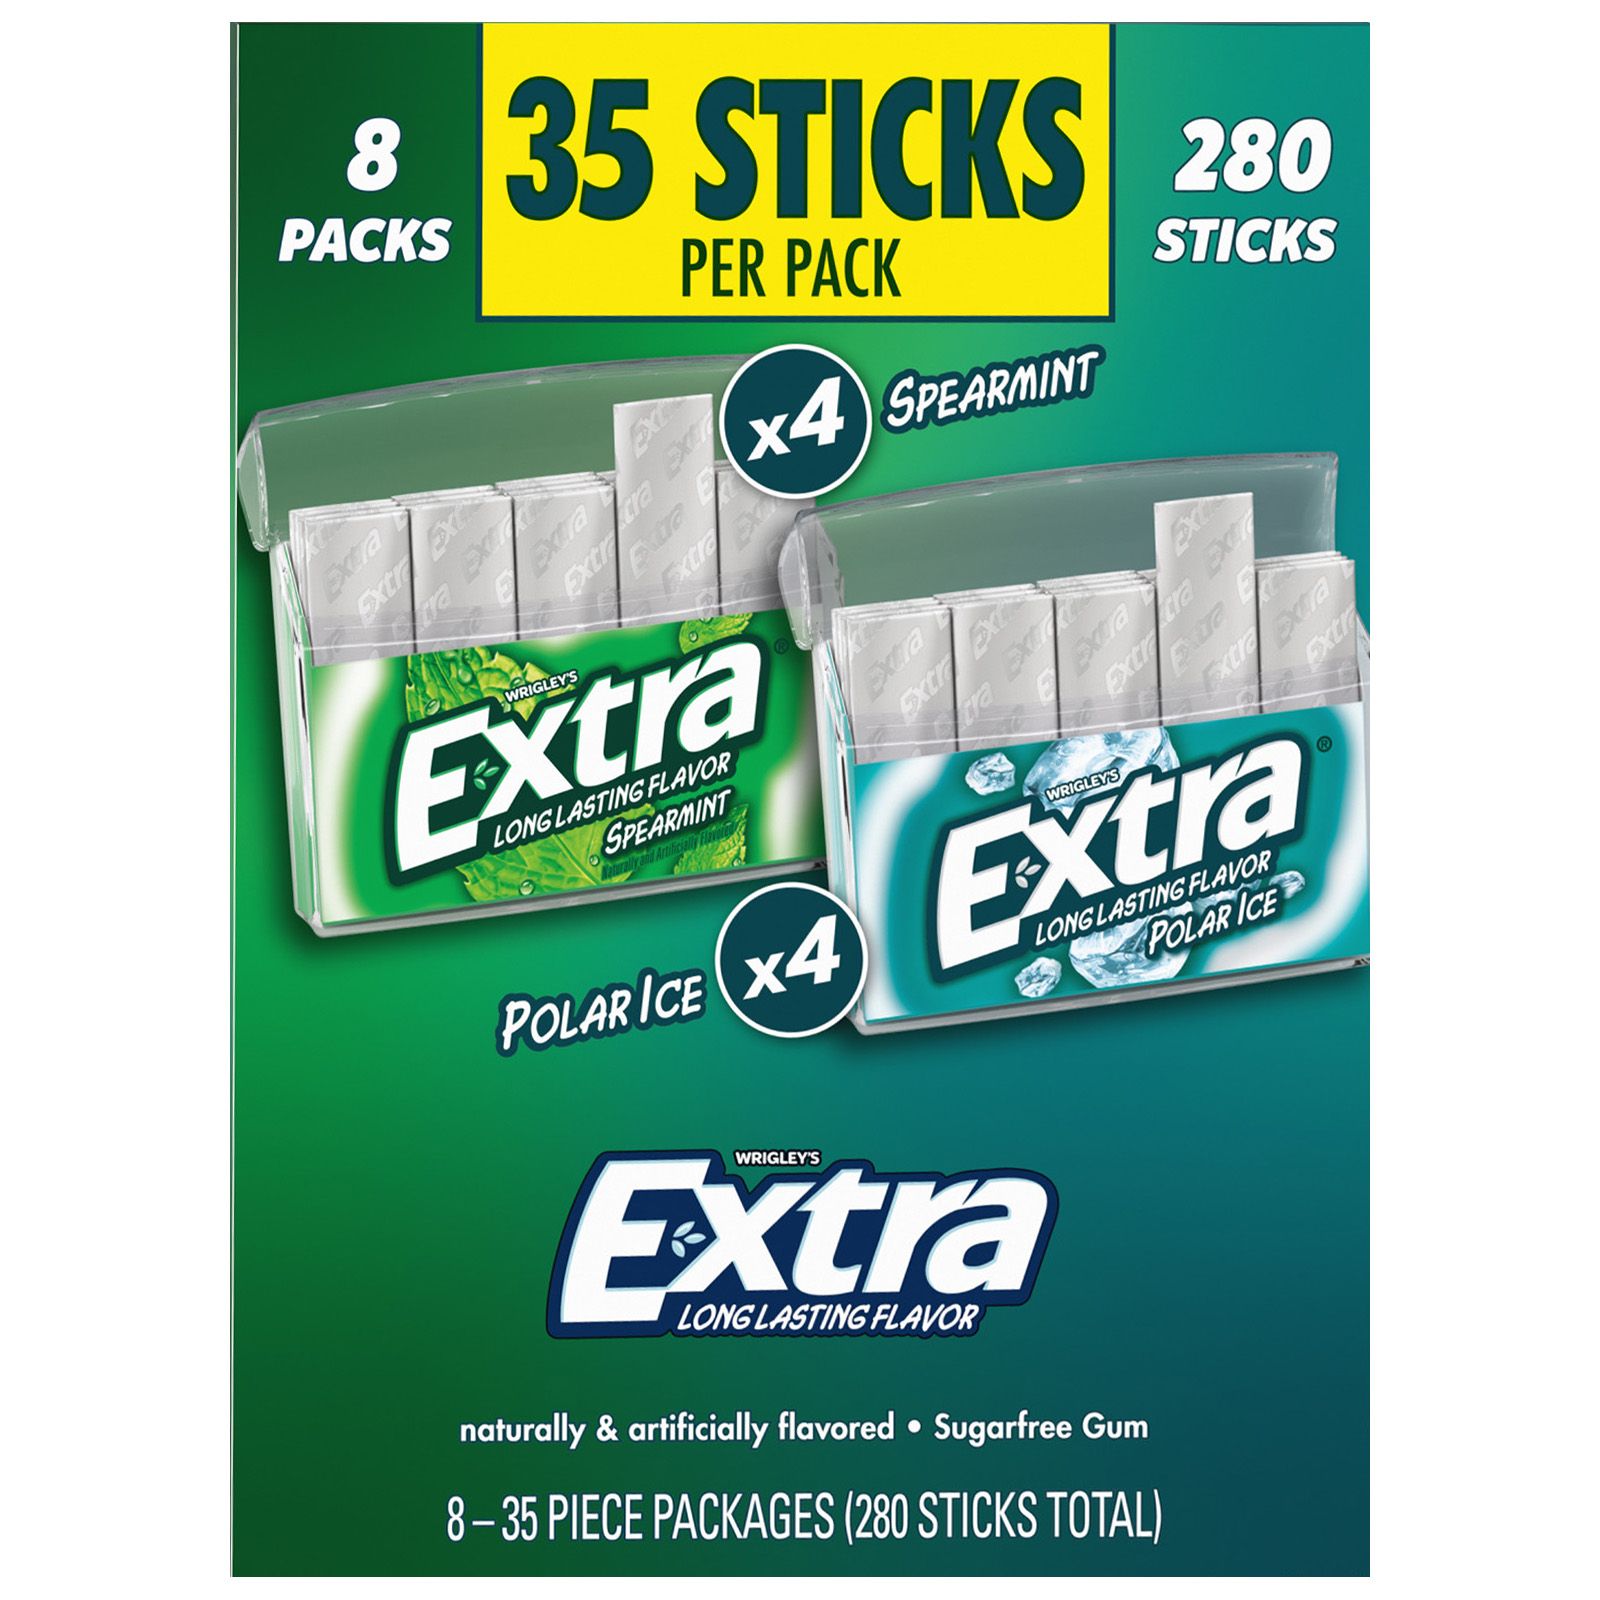 Extra Polar Ice & Spearmint Sugar Free Chewing Gum Variety Pack, 8 pk.